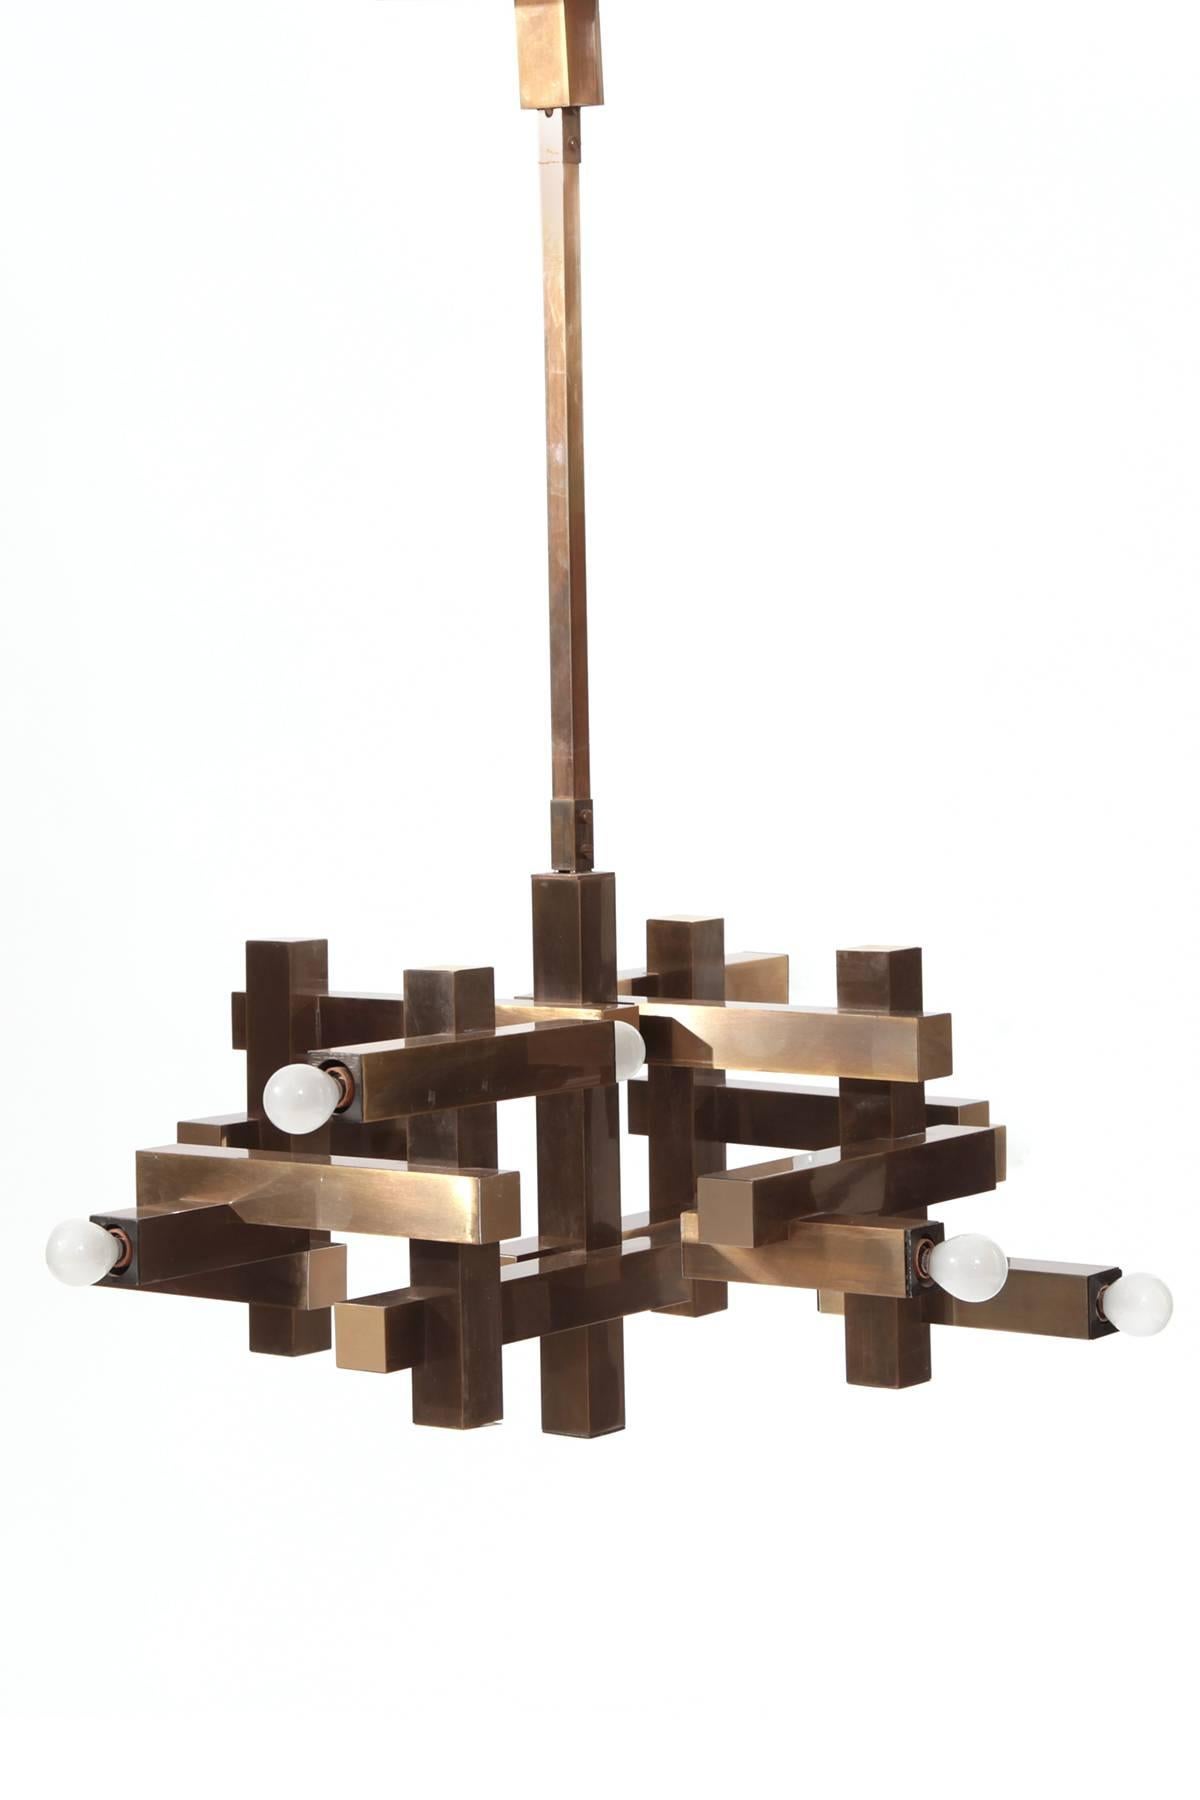 Gaetano Sciolari for Lightolier bronze hanging lamp circa mid 1960's. This phenomenal example has a deep bronze finish with arms and supports going both vertically and horizontally.